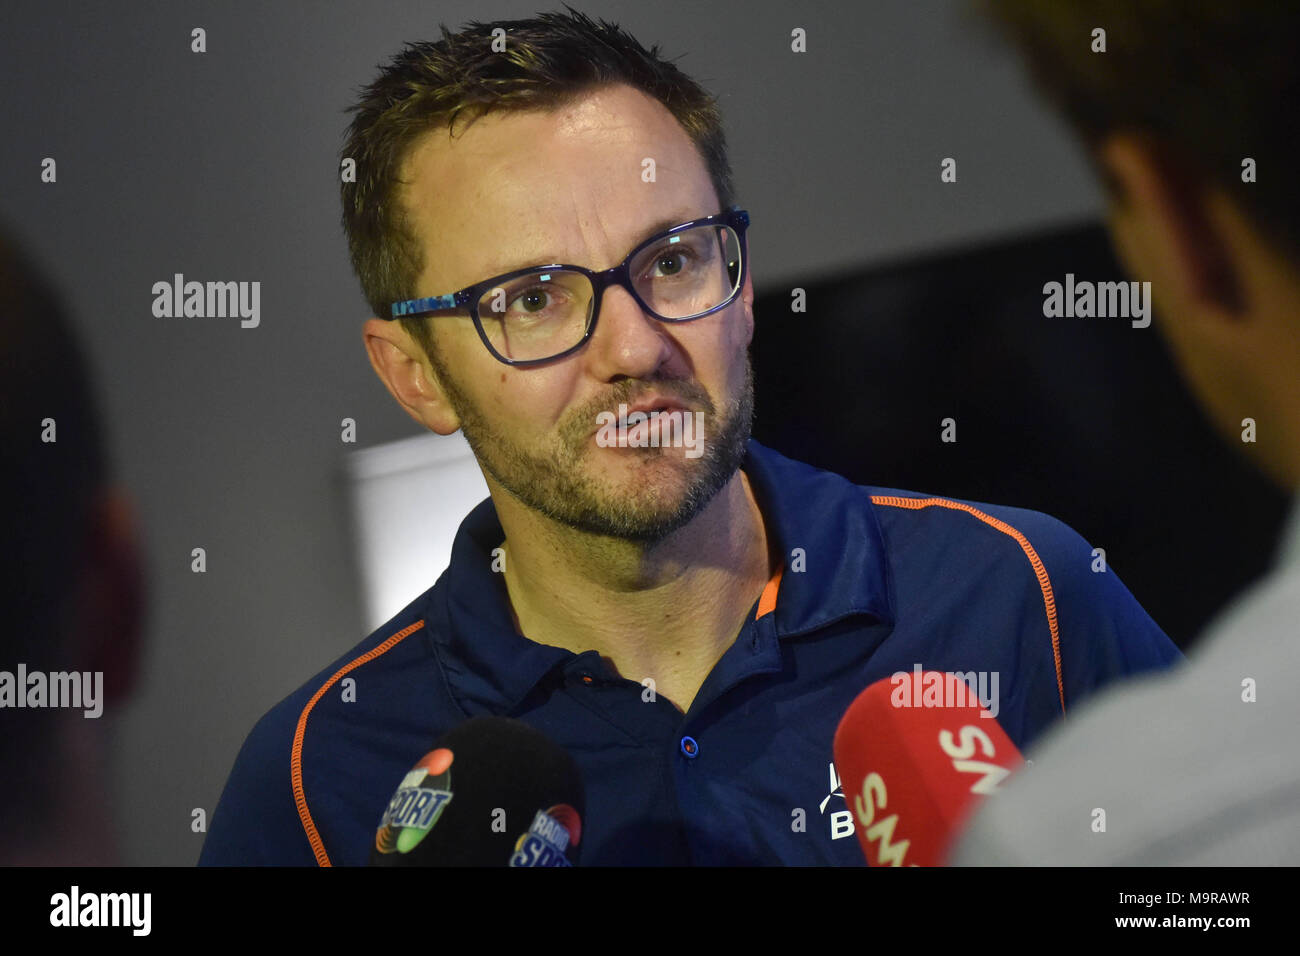 Auckland, New Zealand. 27th Mar, 2018. Blackcaps head coach Mike Hesson speaks to the media after his team wining the First Test match against England last night. Blackcaps win by an inners and 49 runs Credit: Shirley Kwok/Pacific Press/Alamy Live News Stock Photo